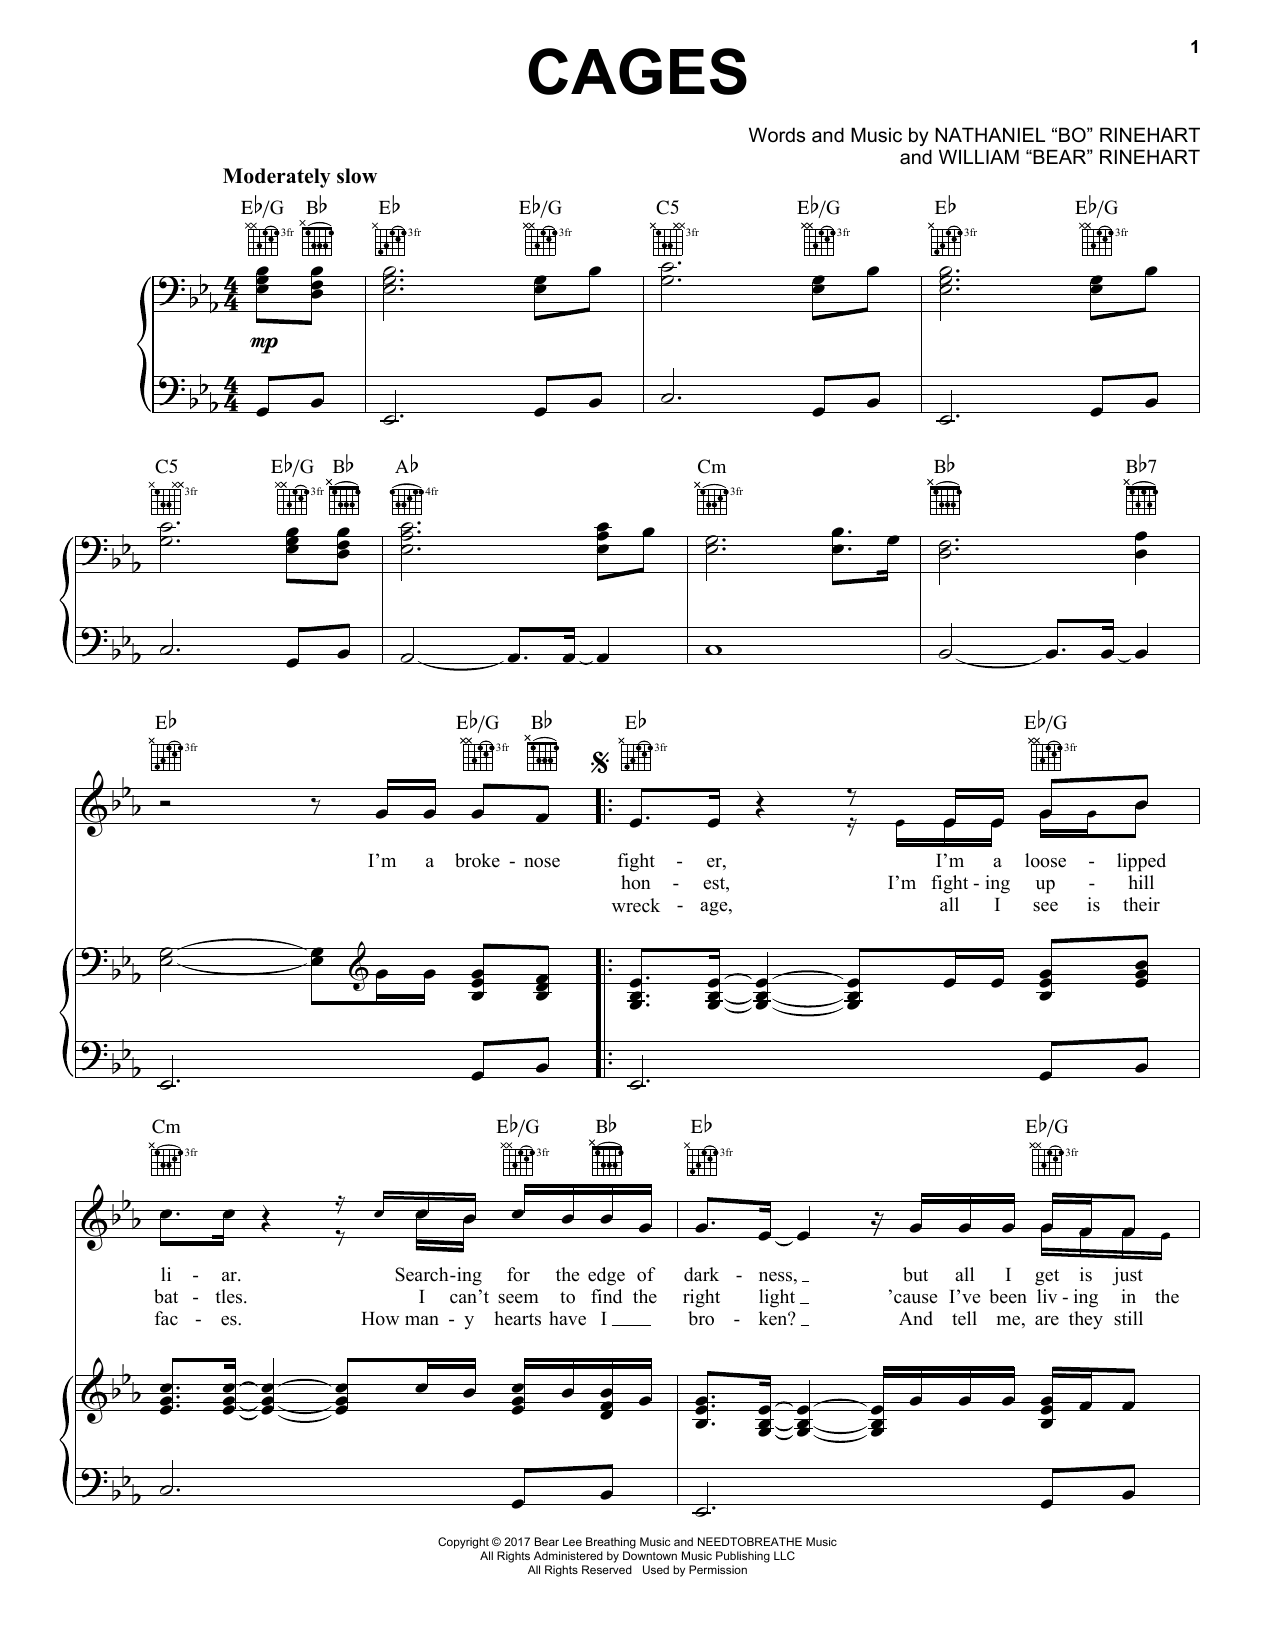 Download NEEDTOBREATHE Cages Sheet Music